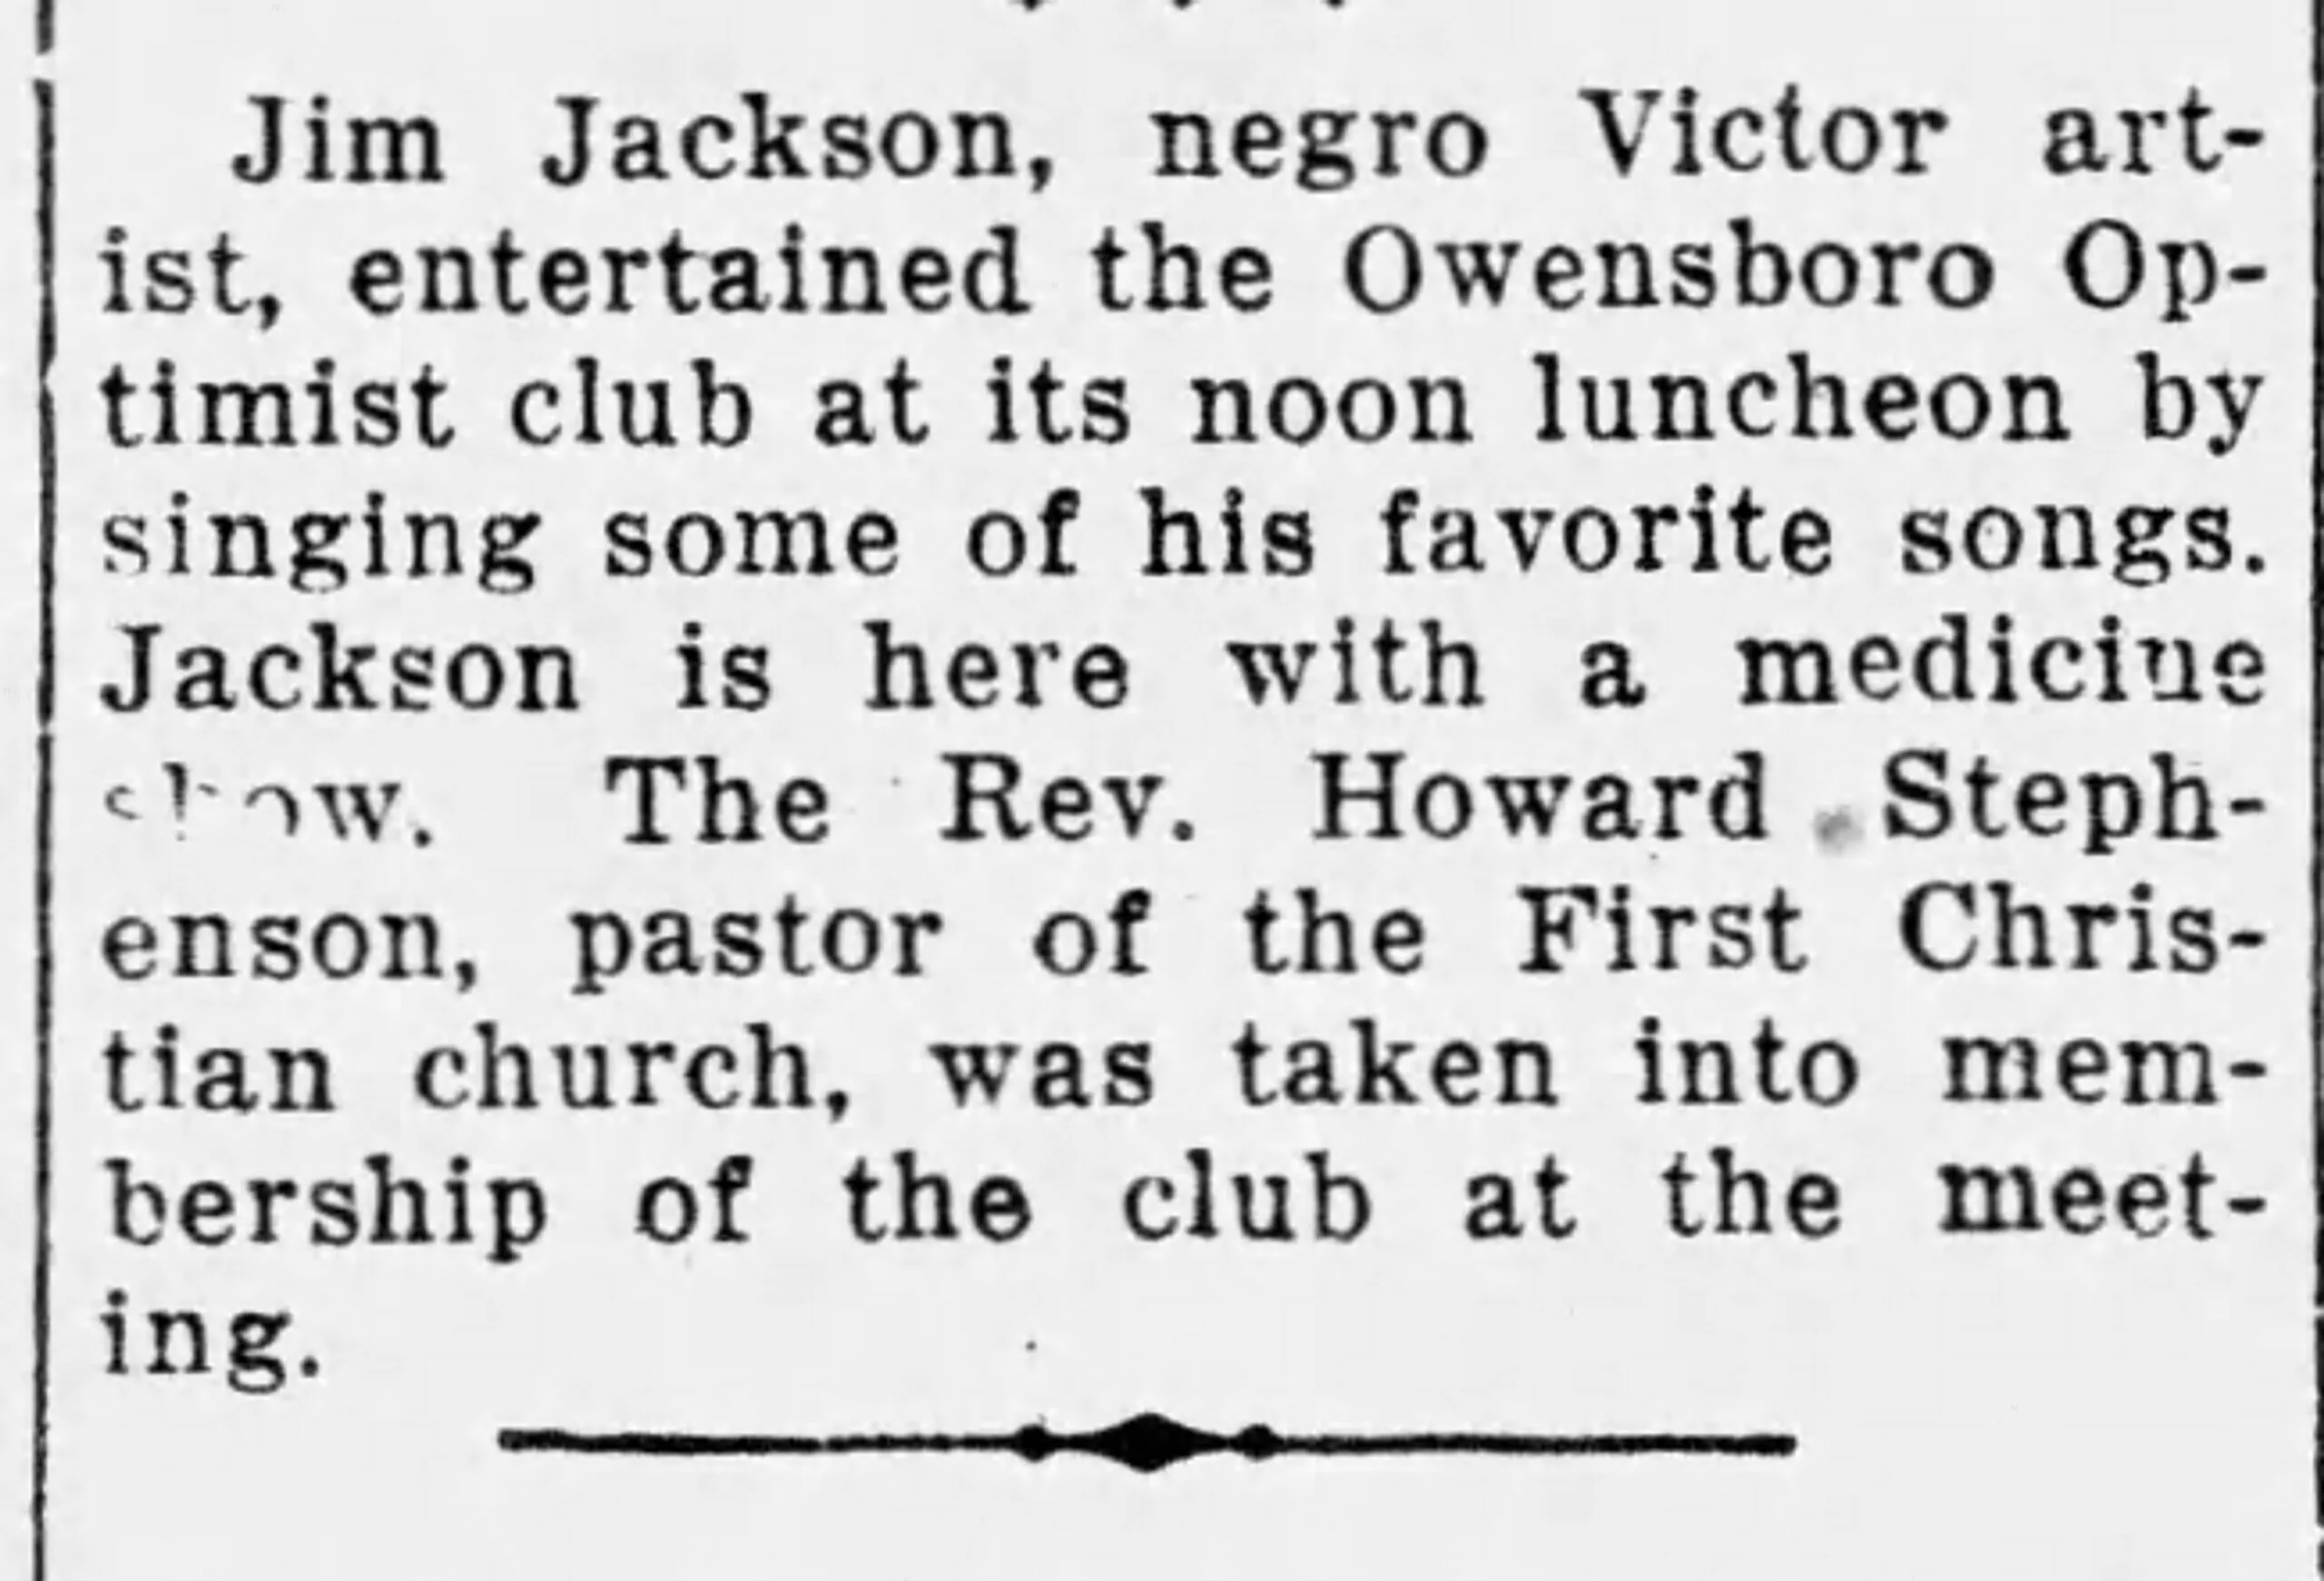 Owensboro (KY) Messenger Inquirer, May 29, 1928.